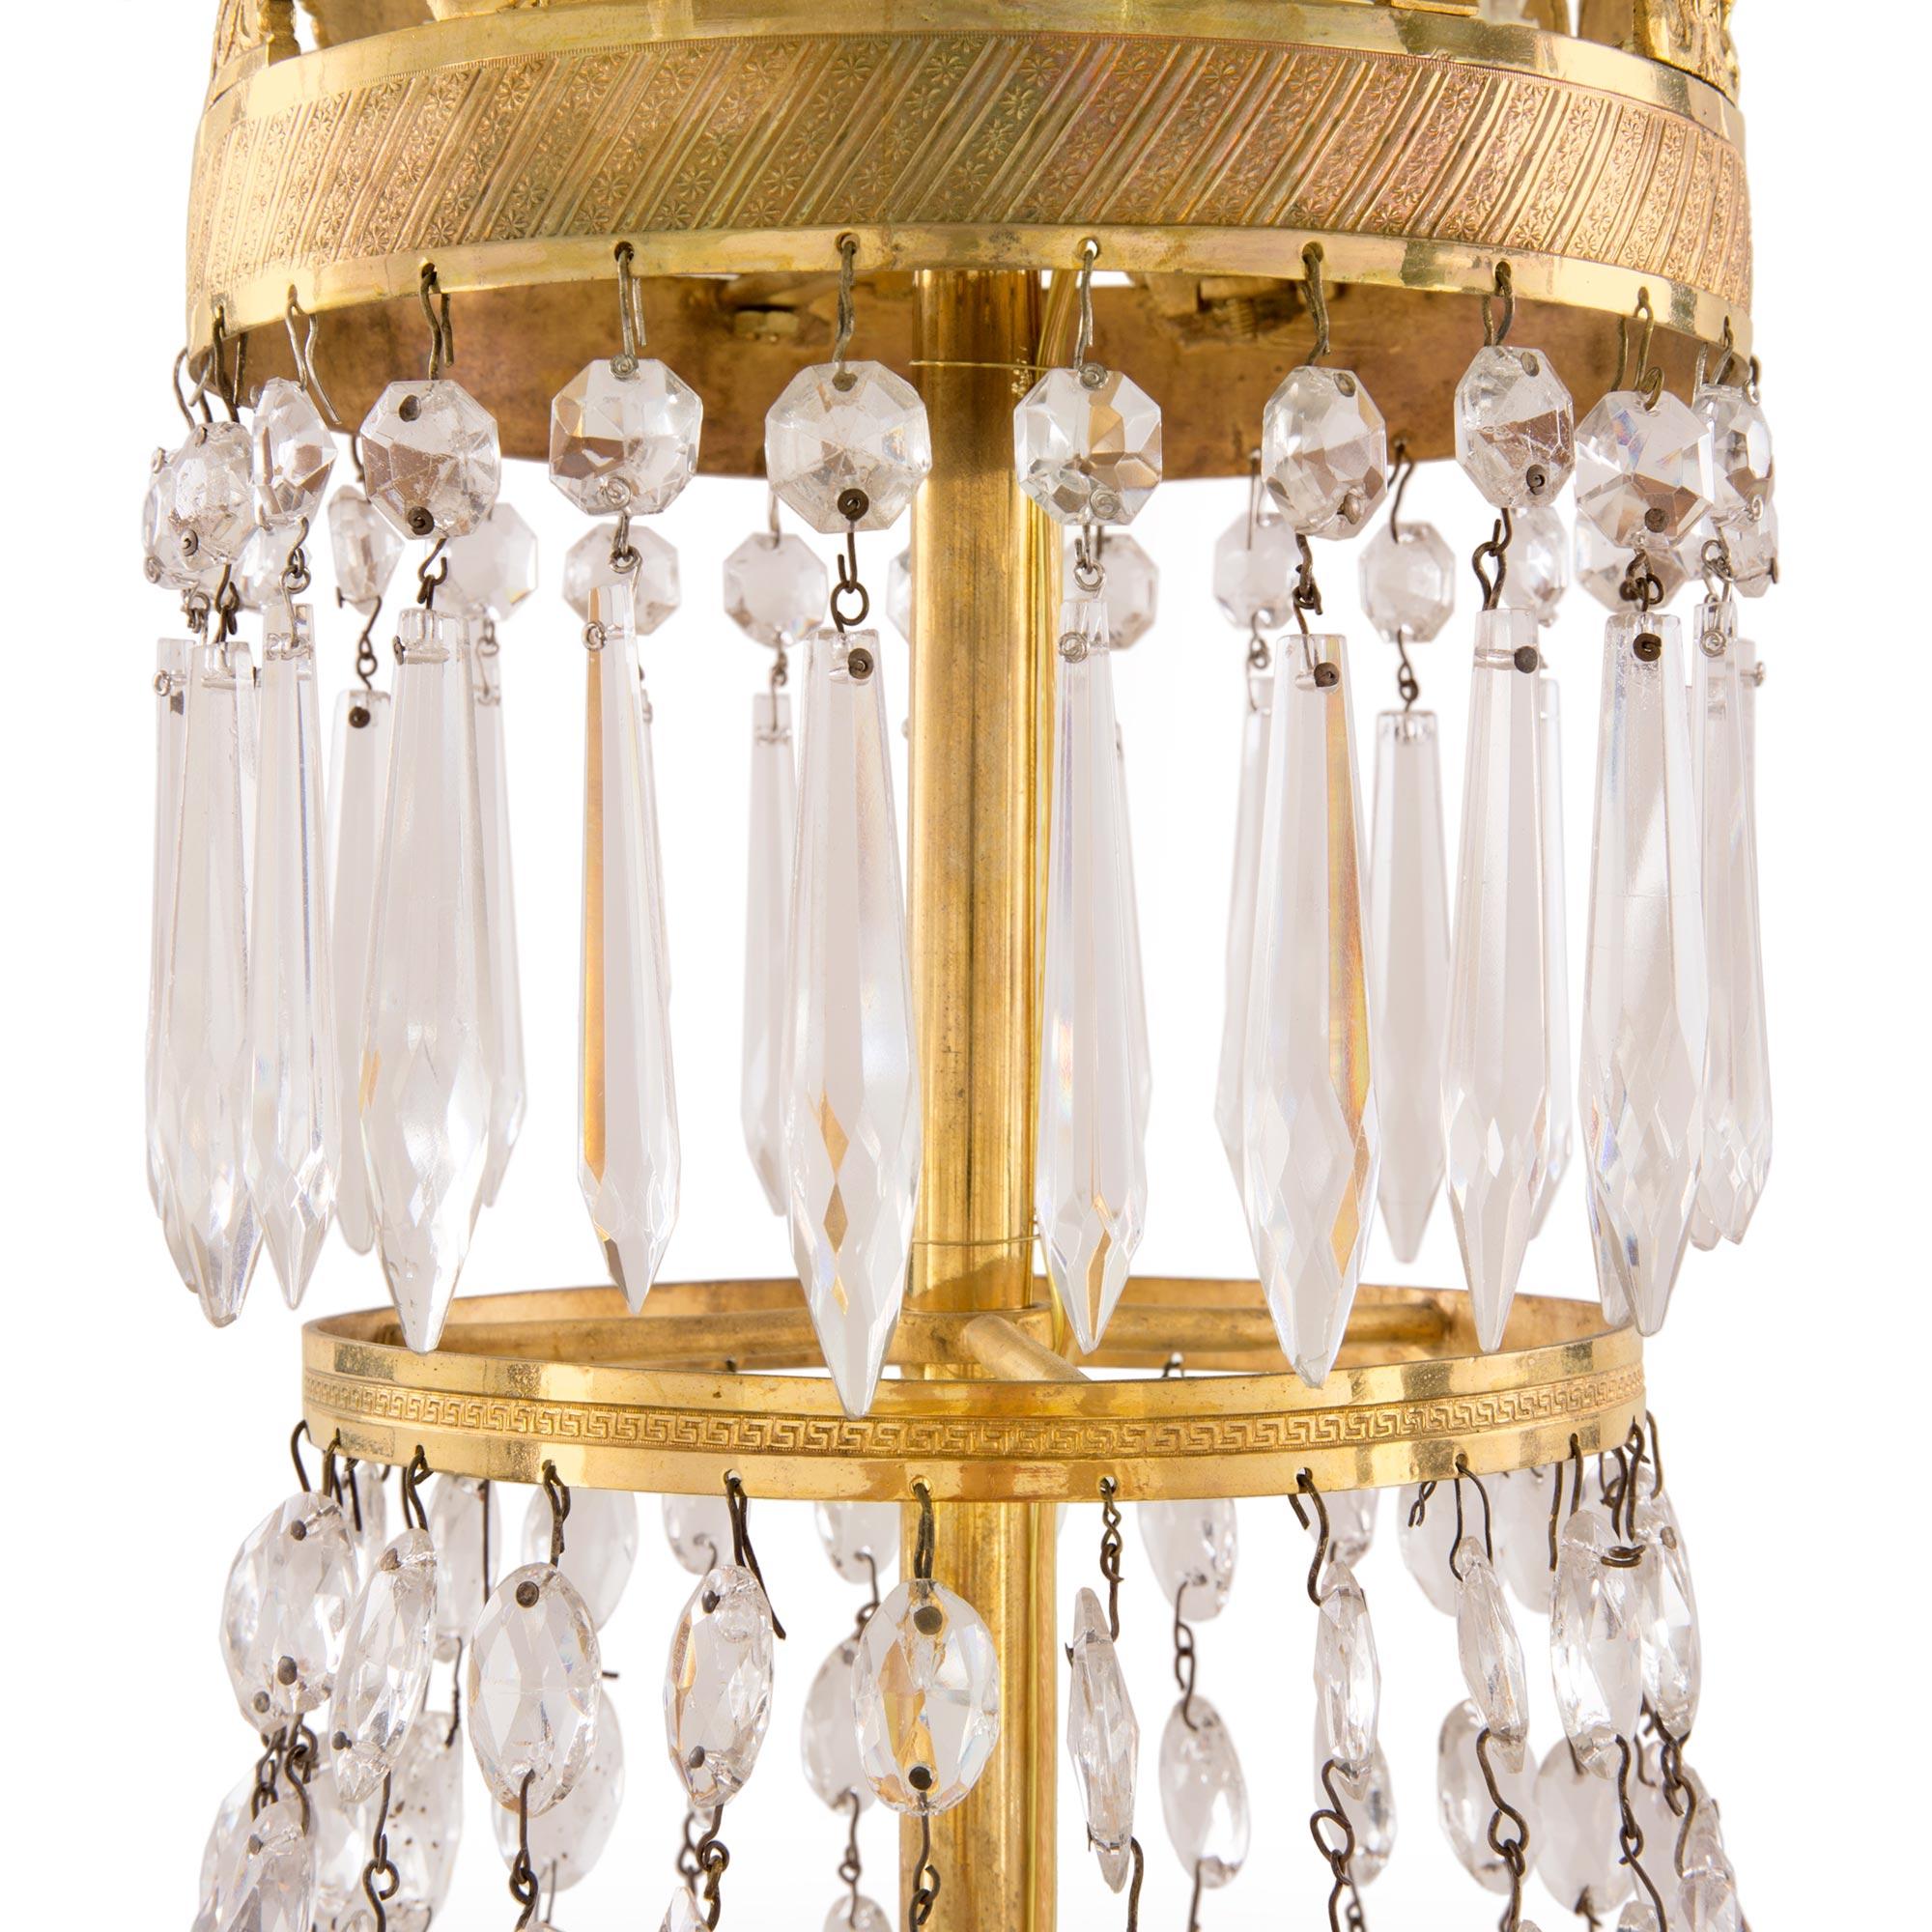 French 19th Century Neoclassical Style Ormolu and Baccarat Crystal Chandelier For Sale 1